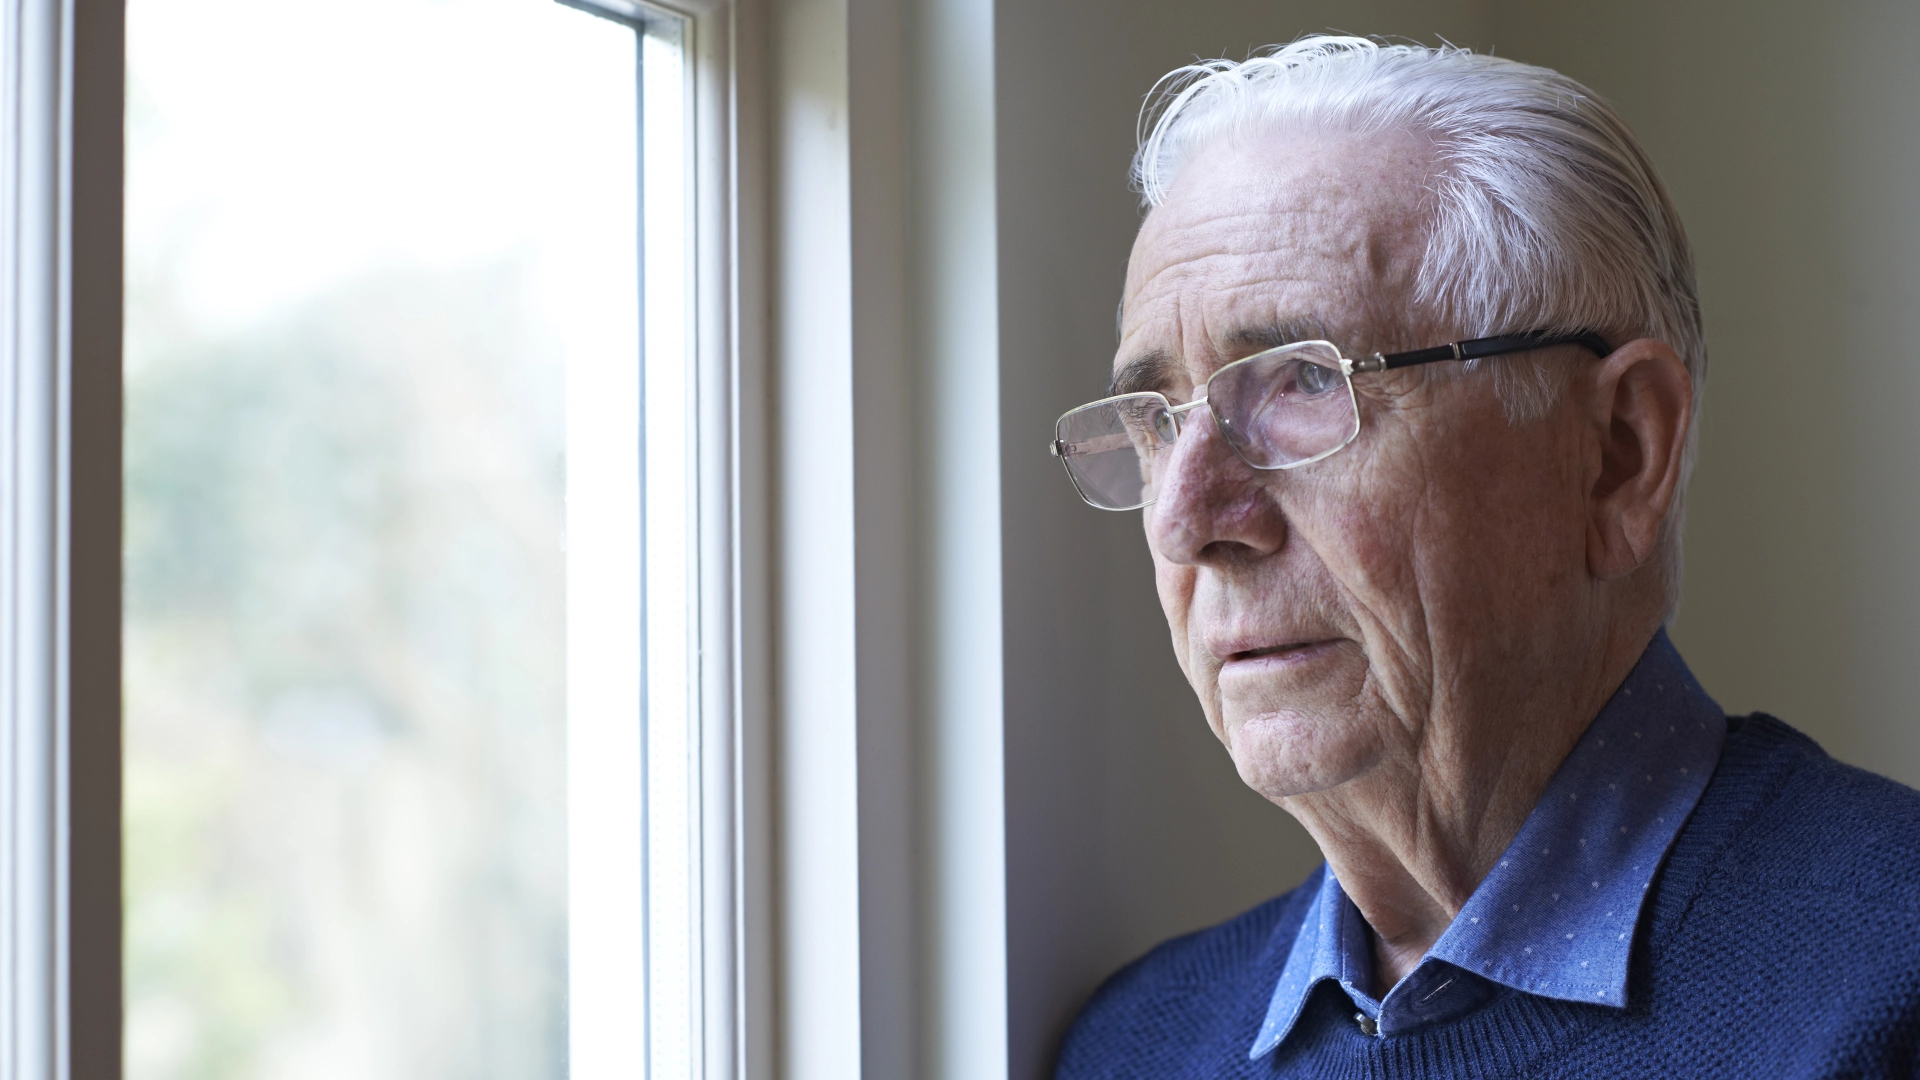 Older man with glasses looking out the window
